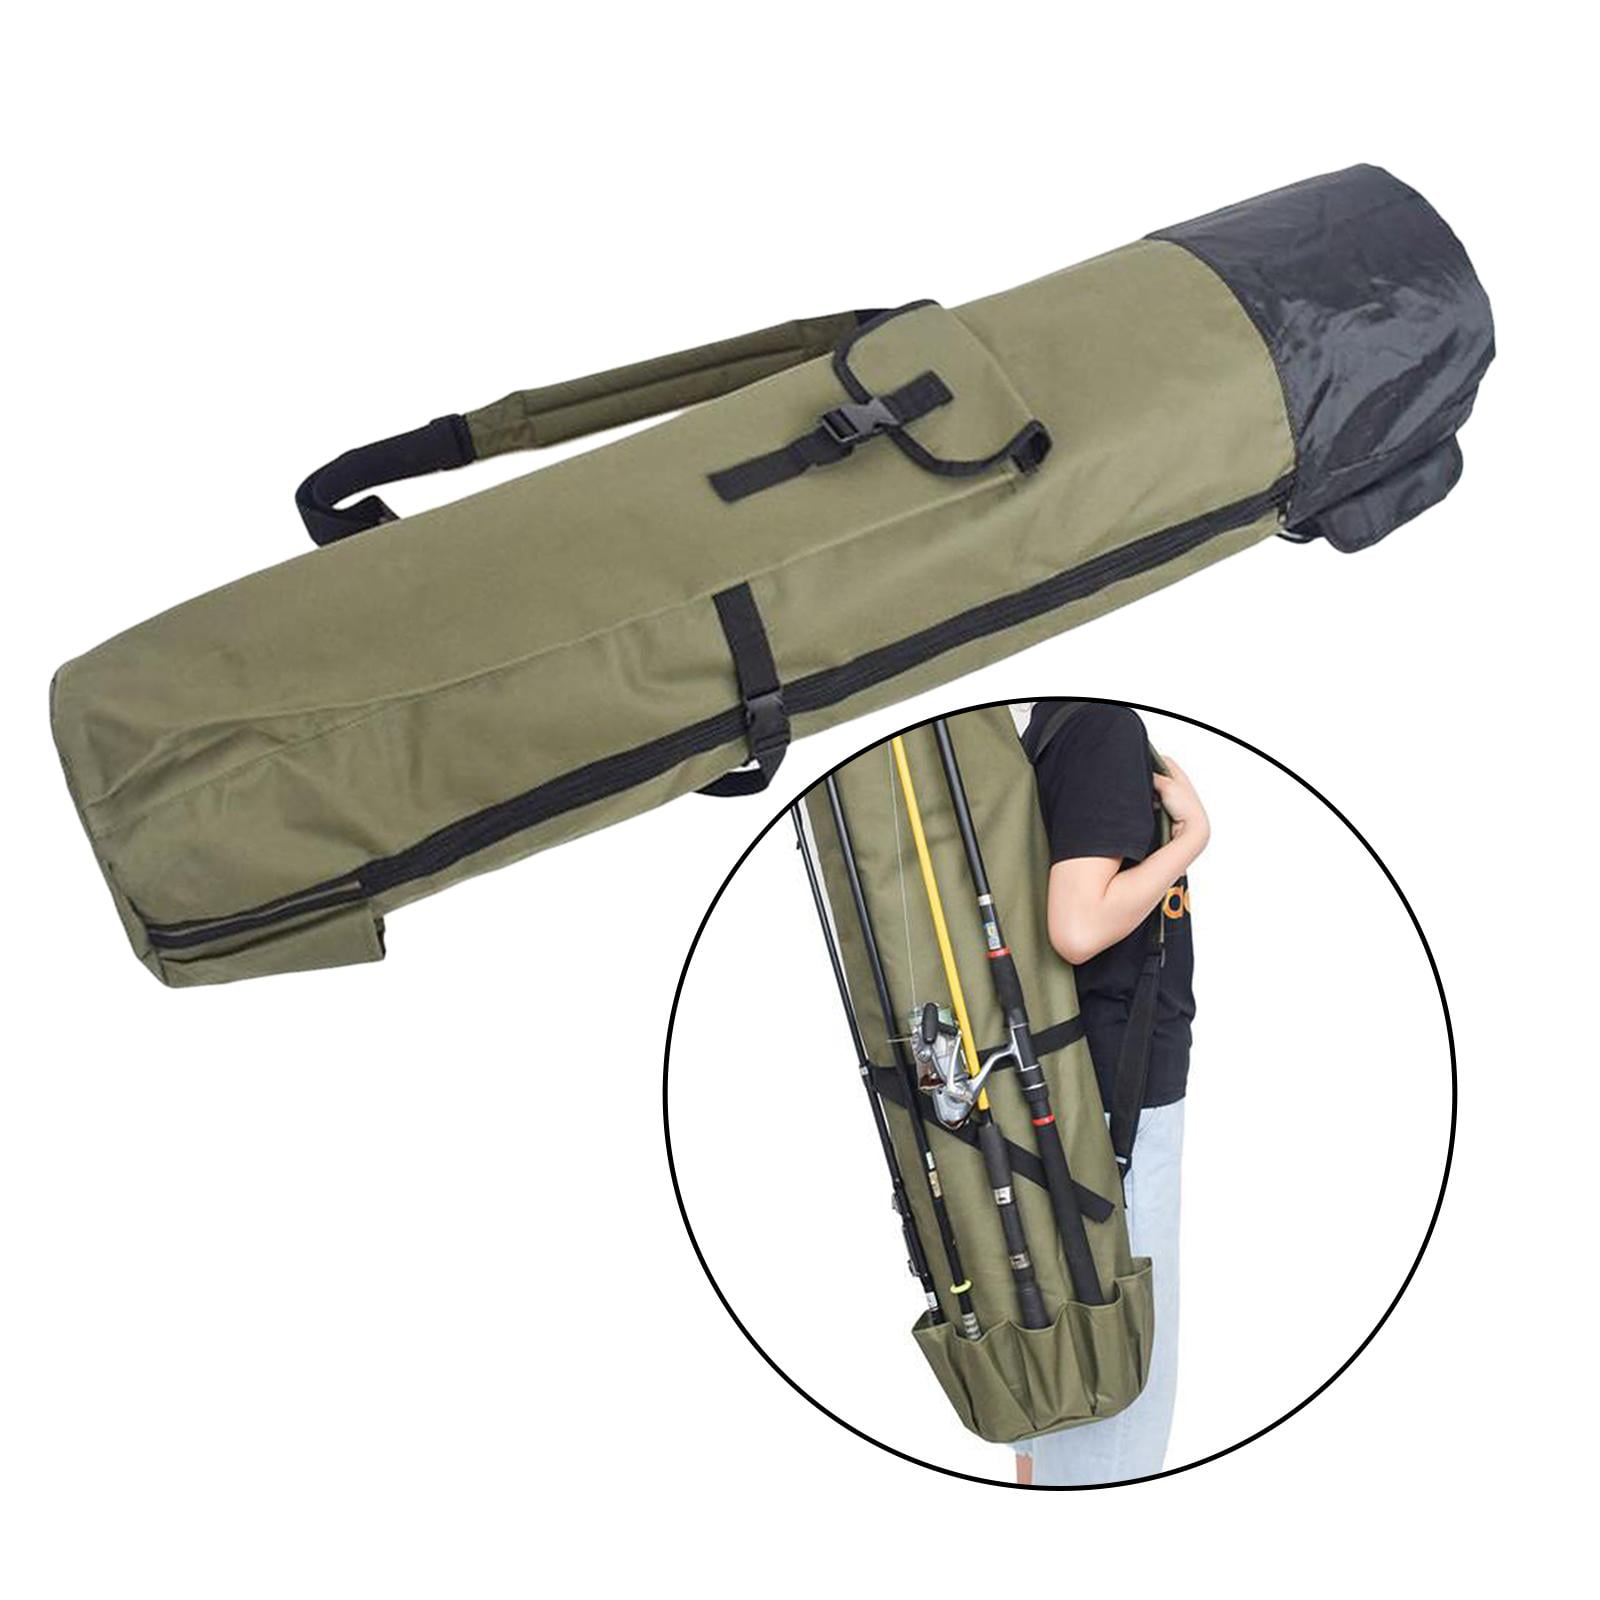 Details about   Outdoor Fishing Rod Reel Organizer Bag Travel Carry Storage Case Holding 5 Poles 